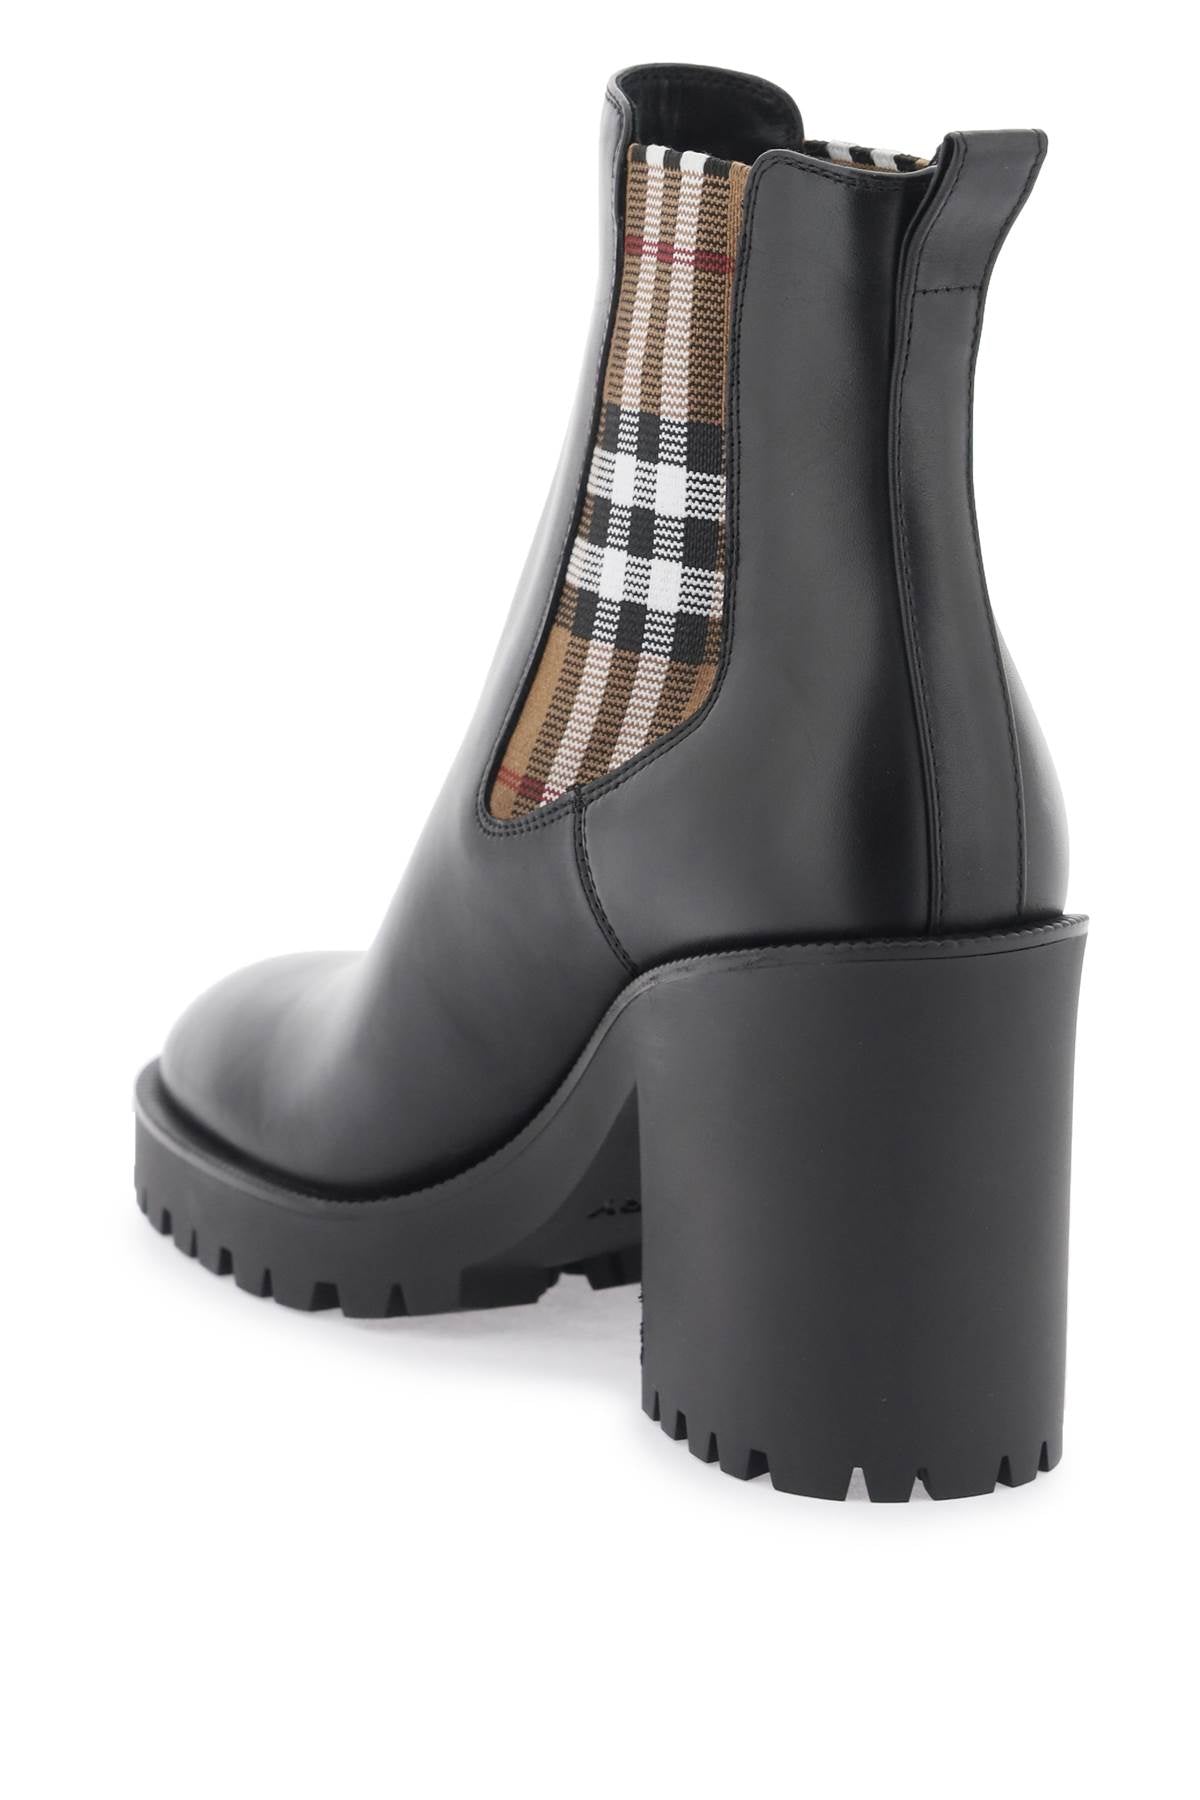 Burberry leather ankle boots with check insert